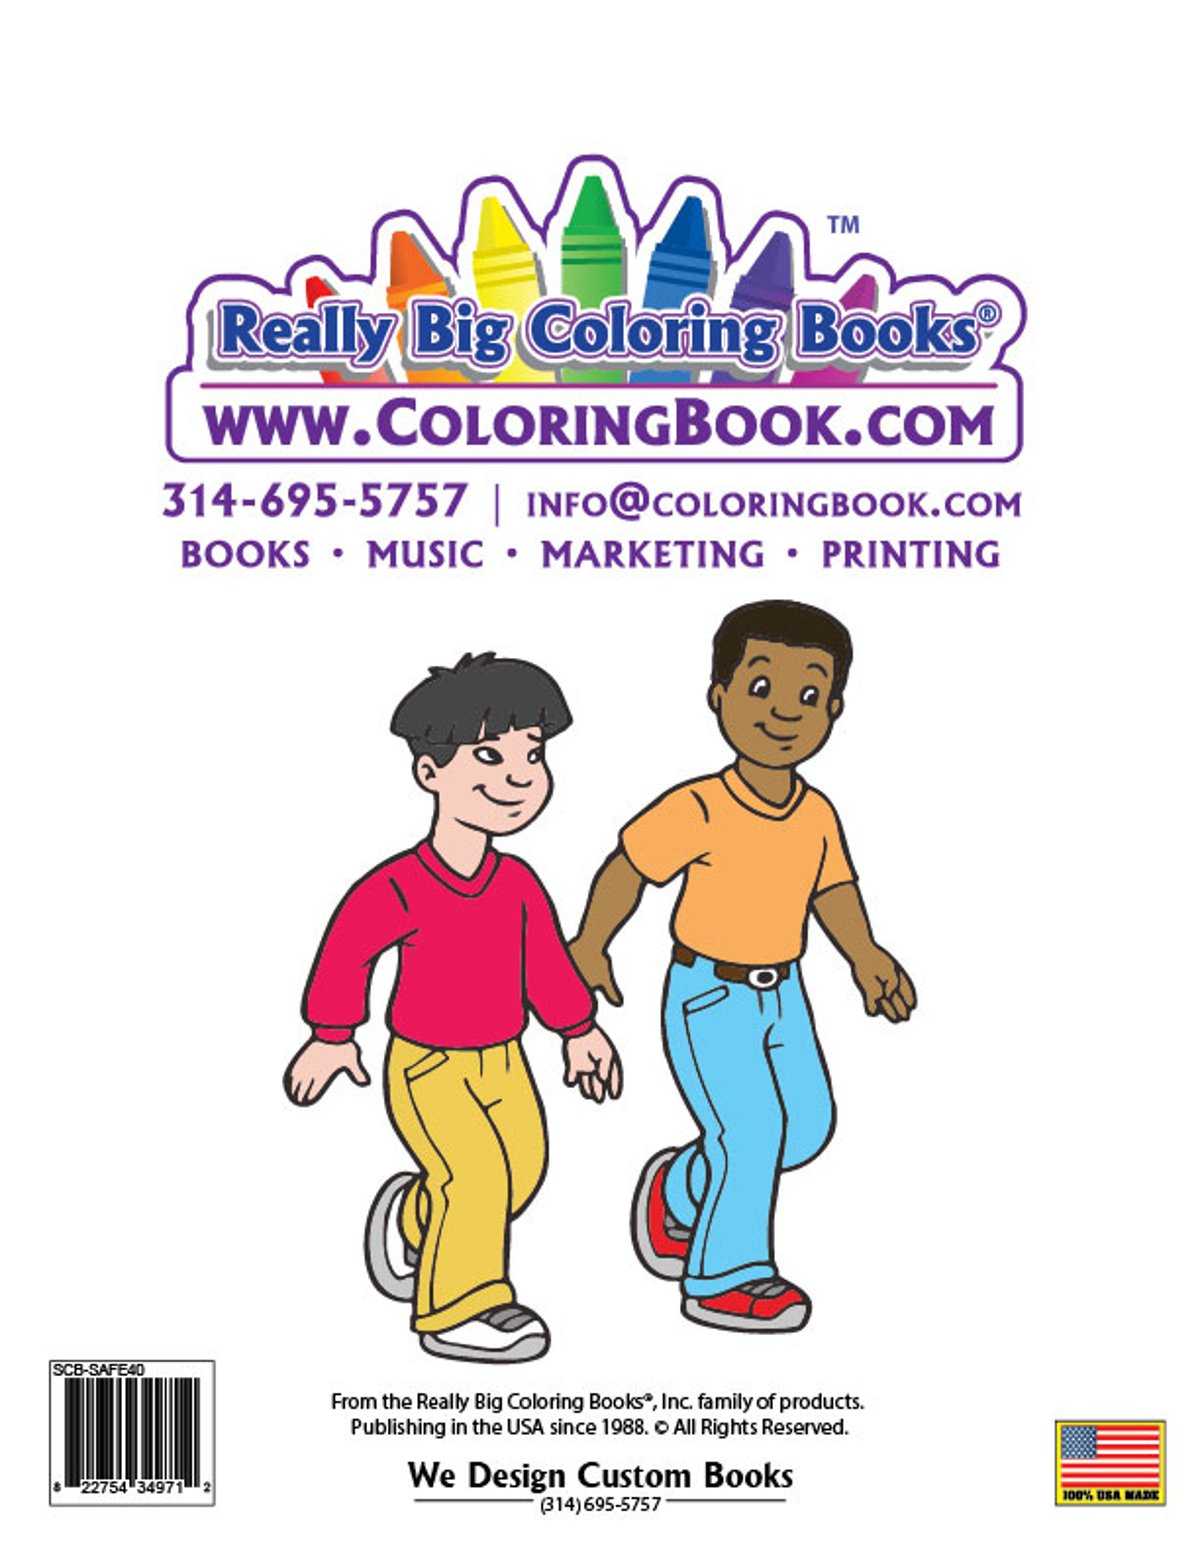 https://images.verishop.com/really-big-coloring-books-child-safety-coloring-book-85-x-11/M09781619534971-3041718066?auto=format&cs=strip&fit=max&w=1200